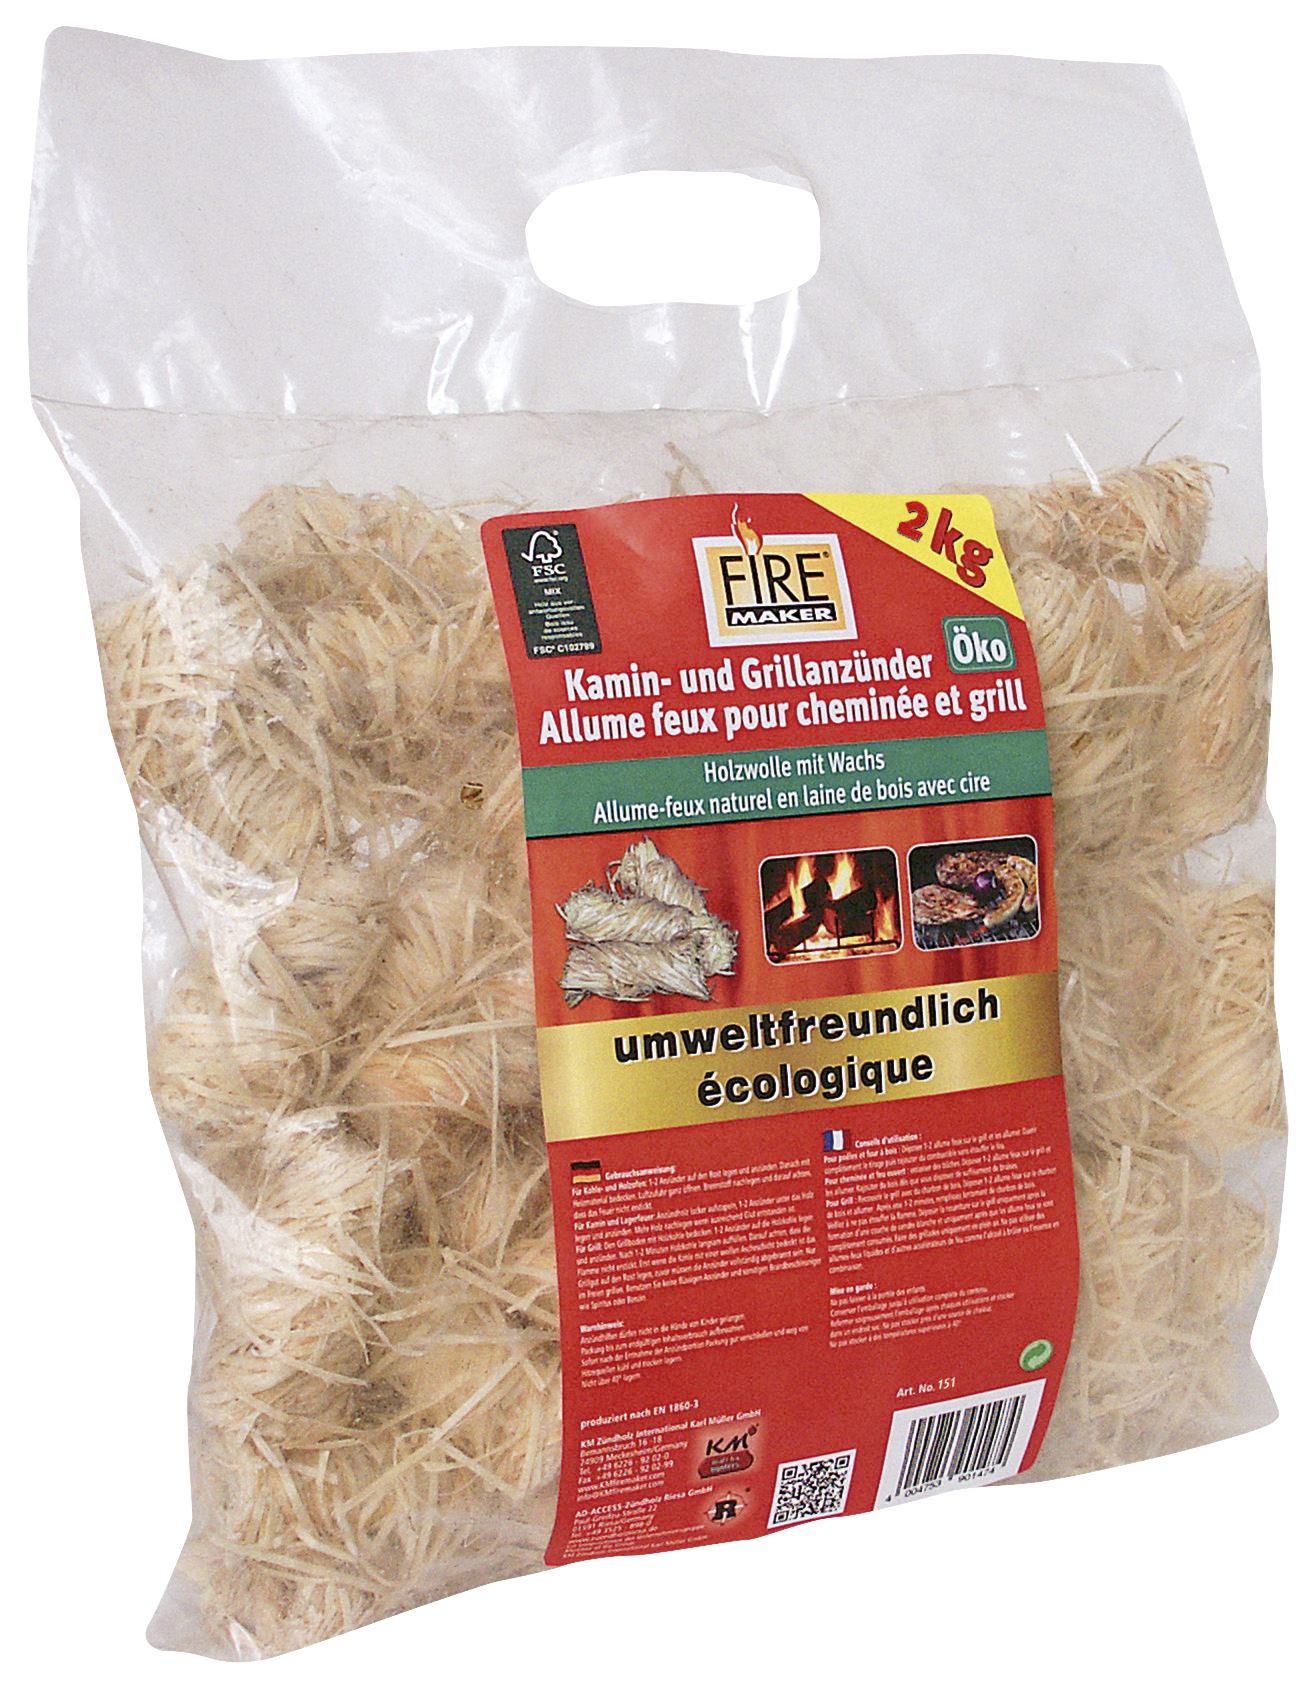 Ecological BBQ Firelighters 2 kg pack wooden wool with wax, patent